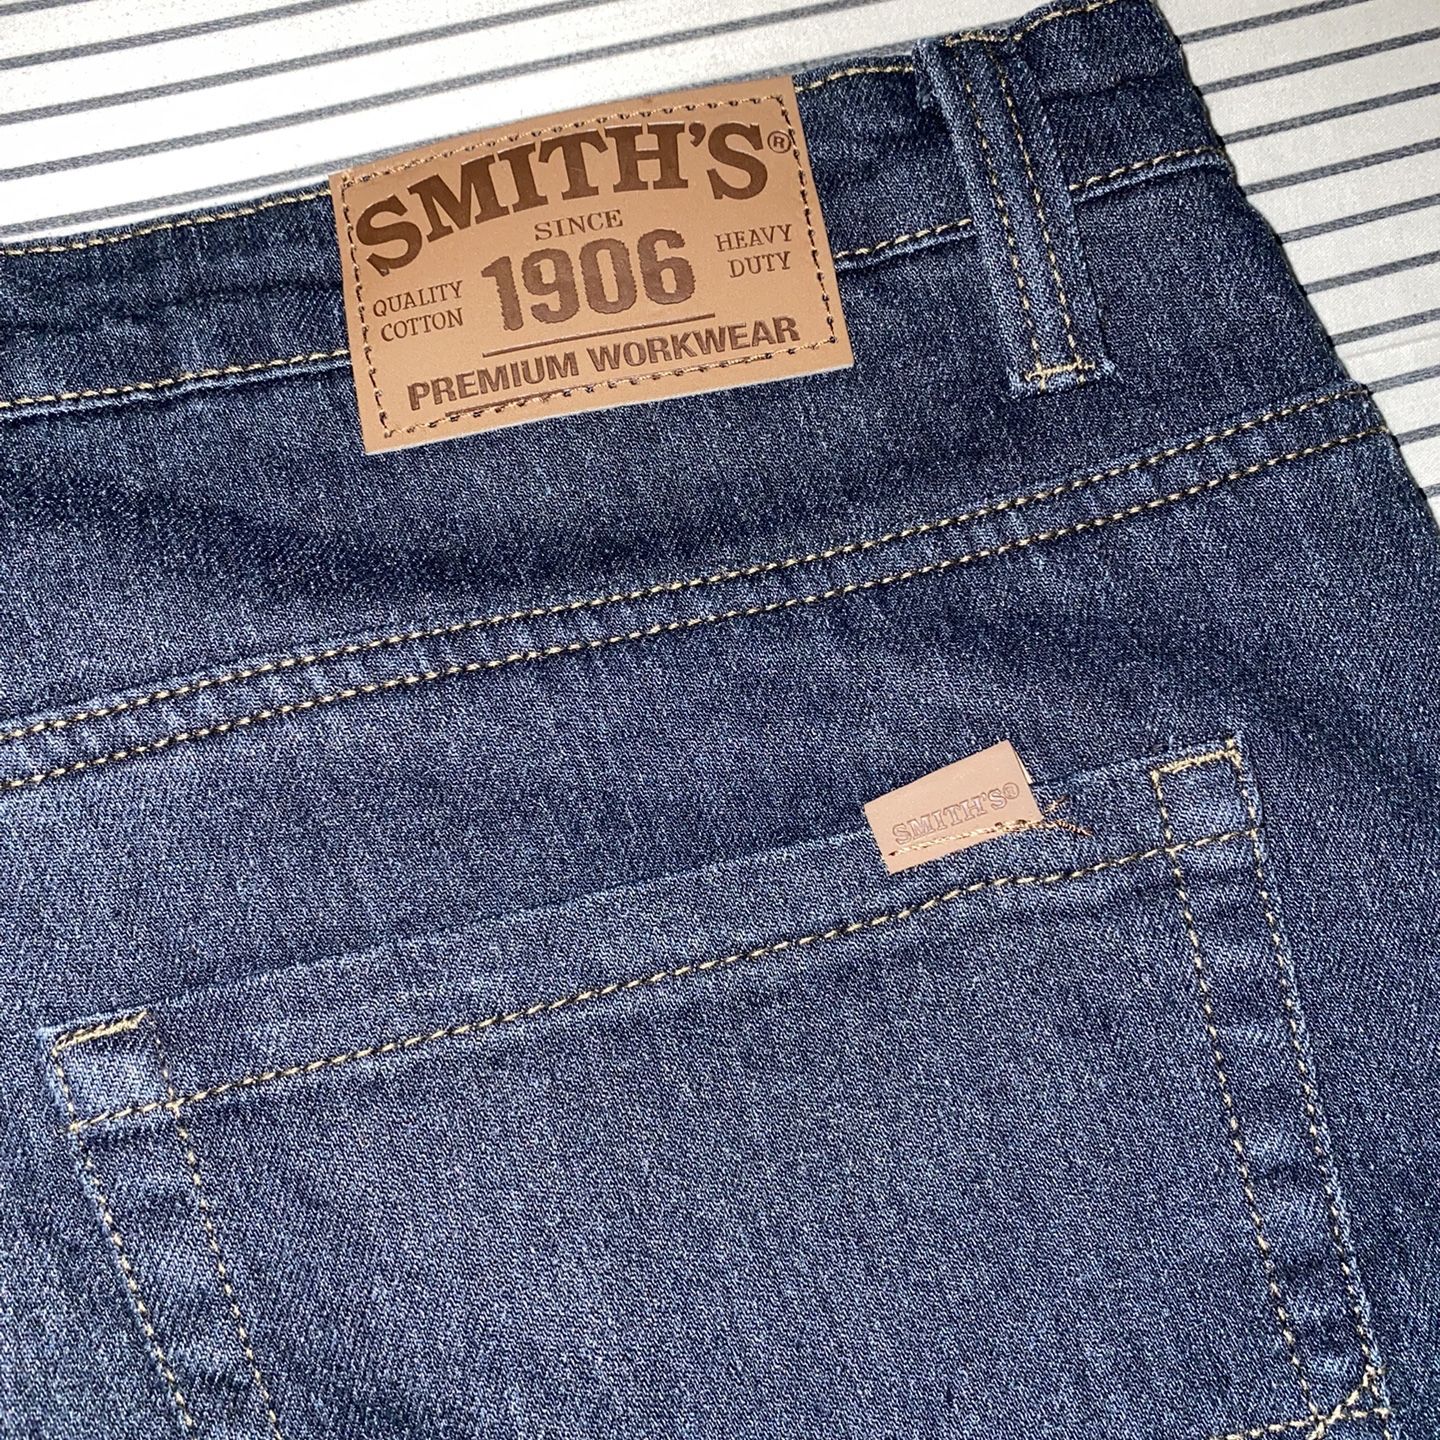 Smith's Workwear Fleece Lined Stretch Denim Pants Size 36x30 New for Sale  in Queens, NY - OfferUp